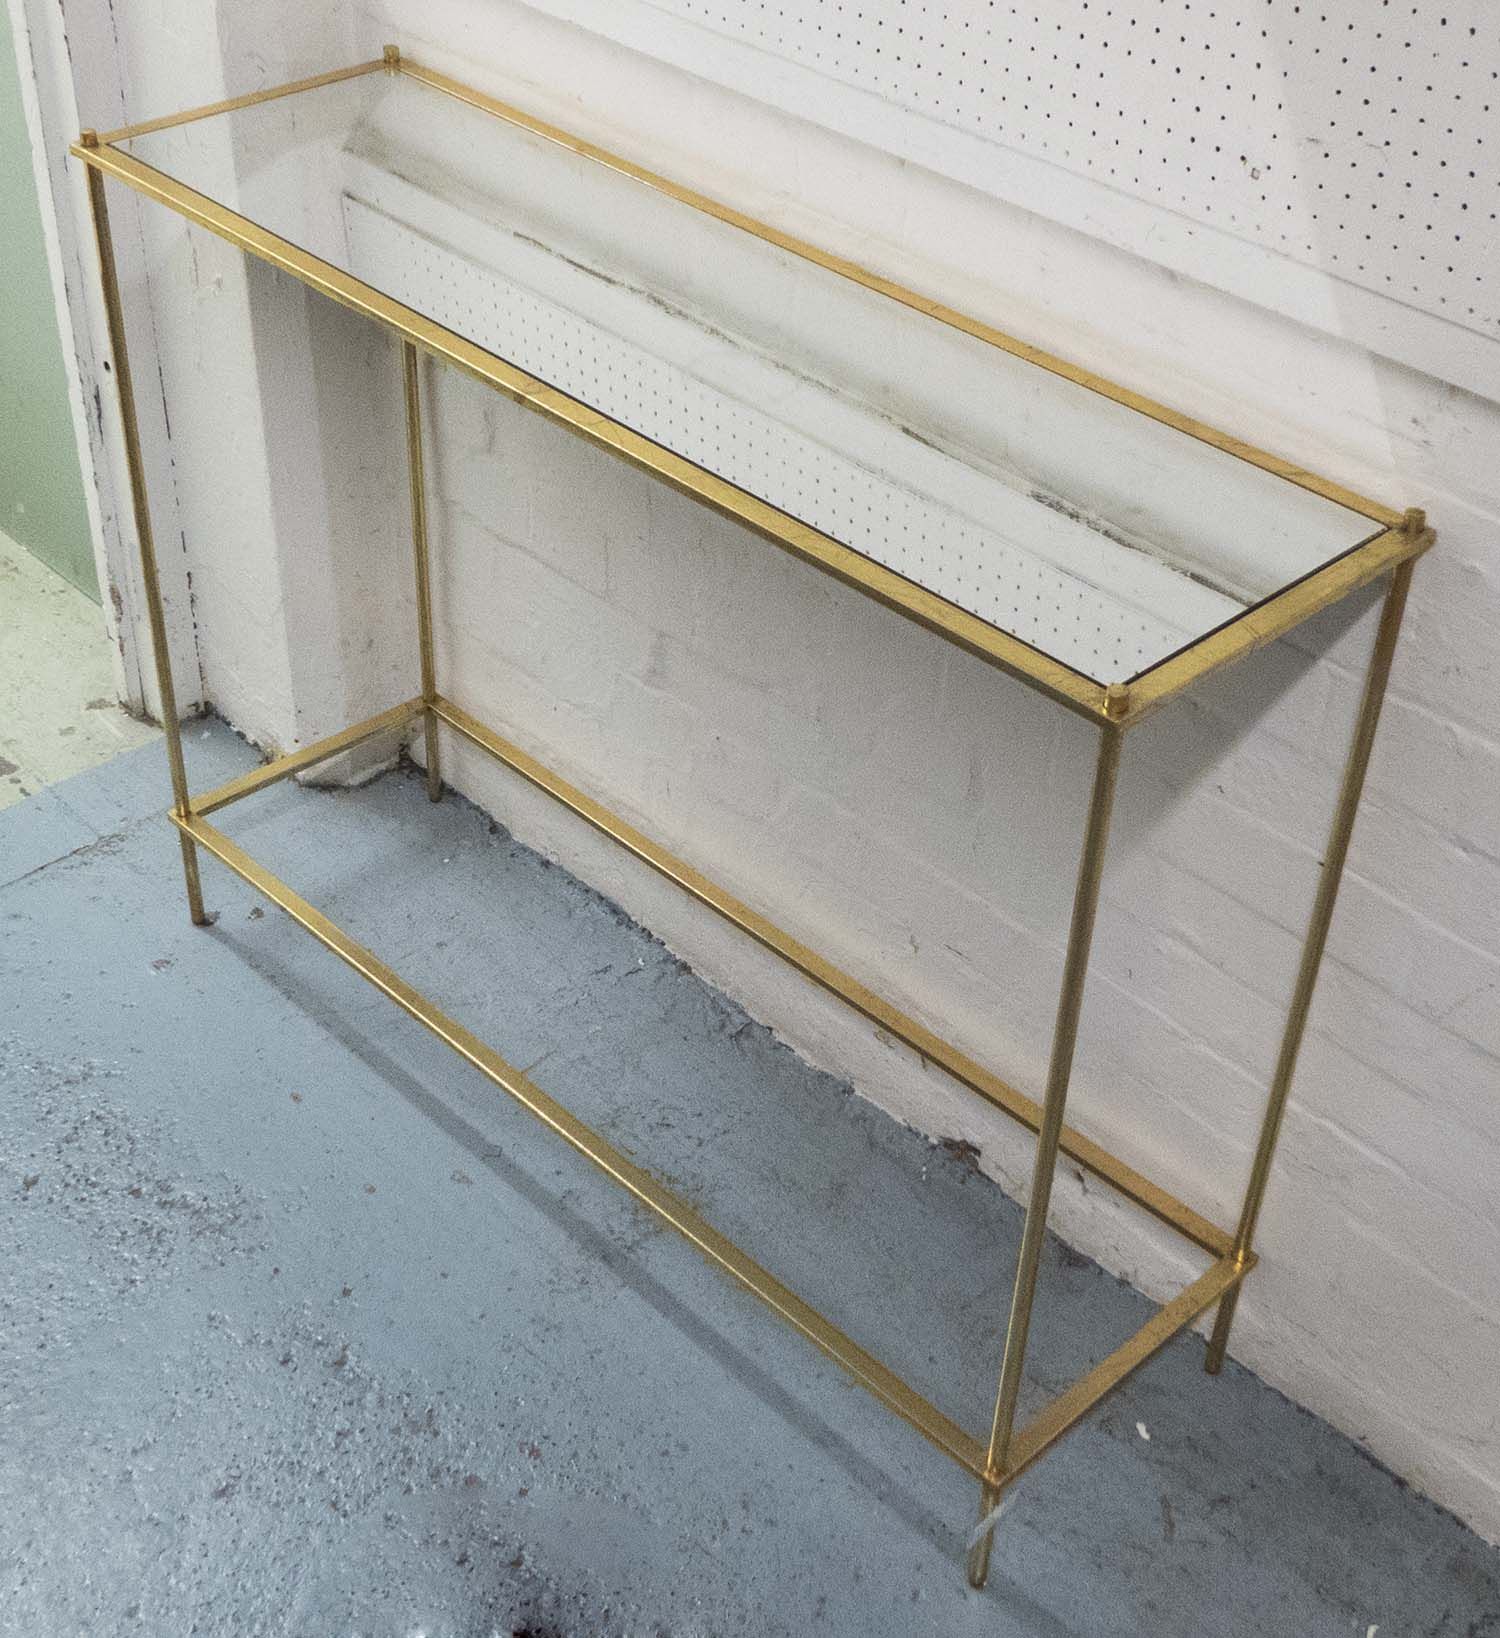 Mirrored Console Table, In A Gilded Metal Frame, 108cm X For Mirrored And Silver Console Tables (View 11 of 20)